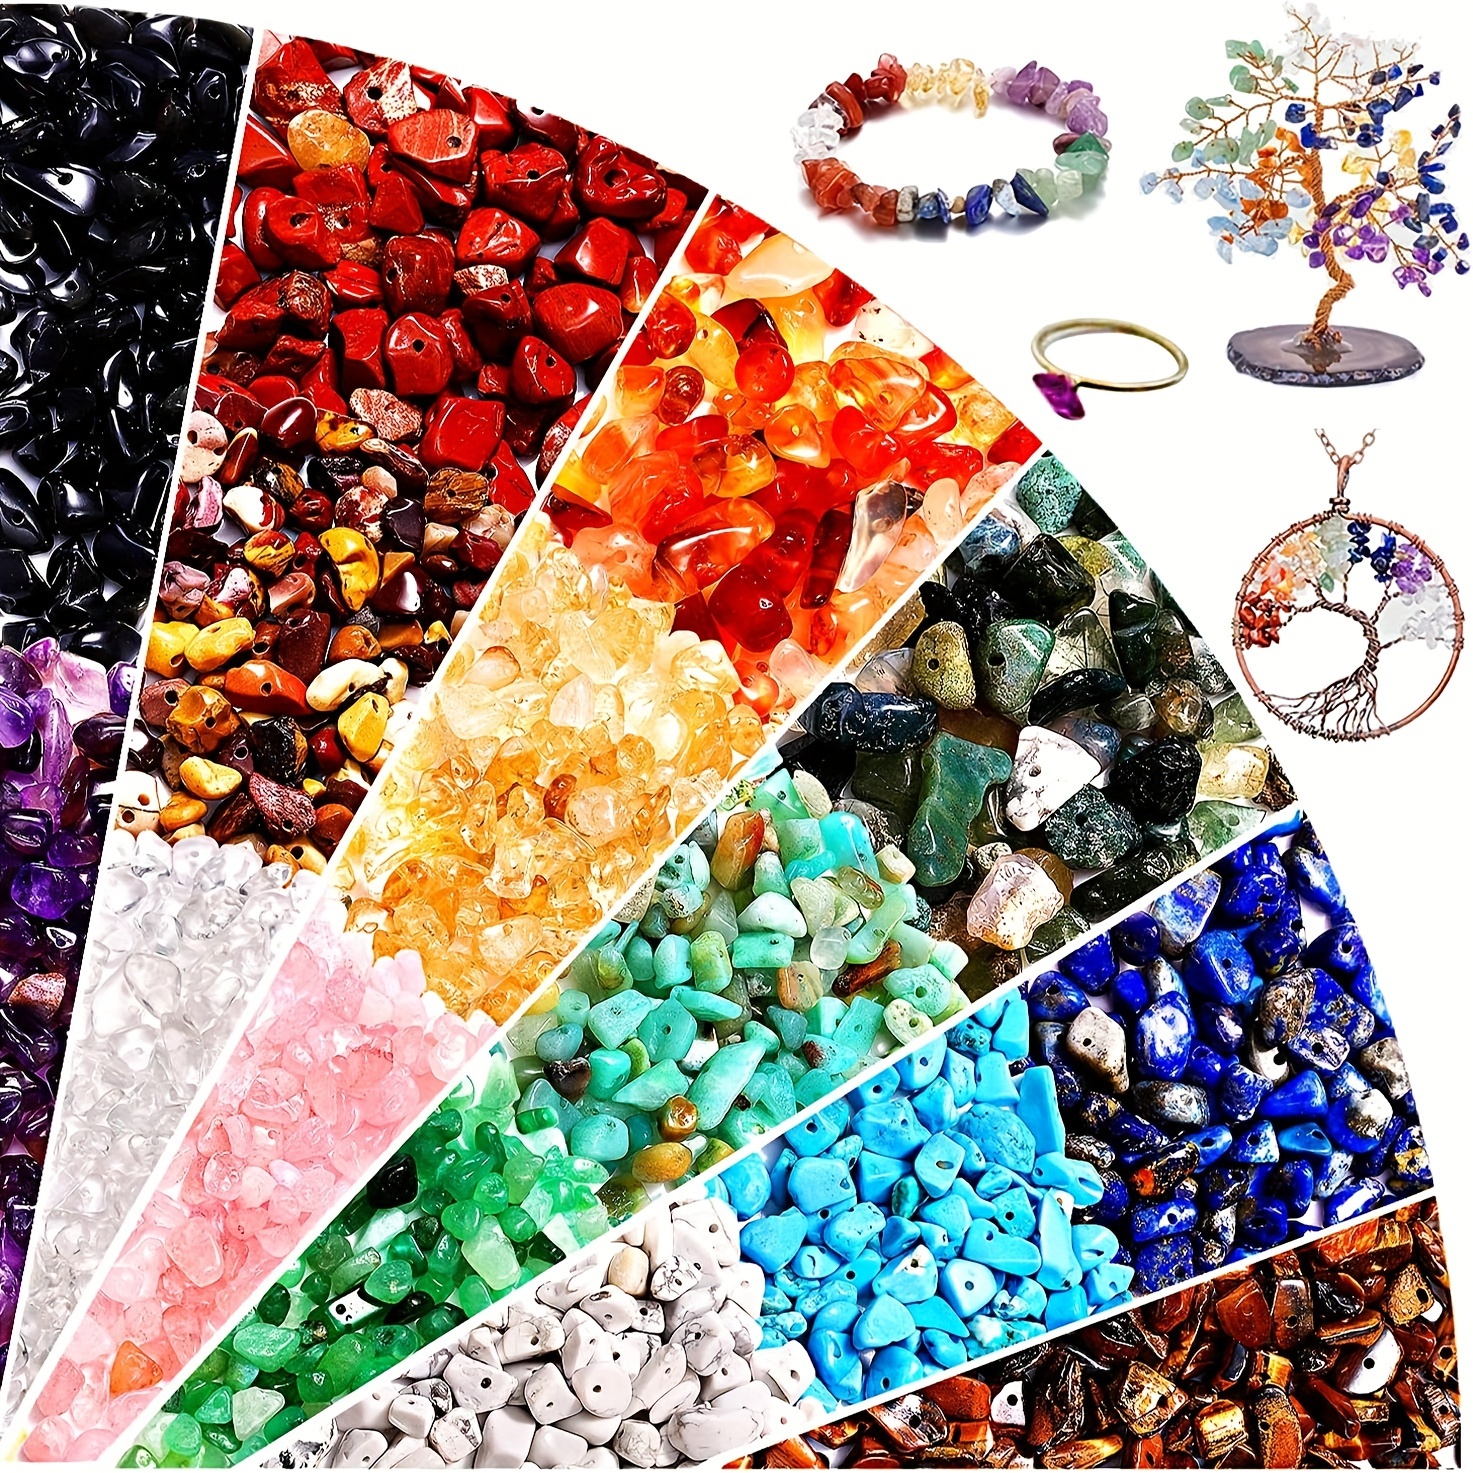 Massive Beads 100PCS 8MM Natural Crystal Beads 10 Kinds of Wooden Beads  Round Loose Energy Healing Beads with Free Crystal Stretch Cord for Jewelry